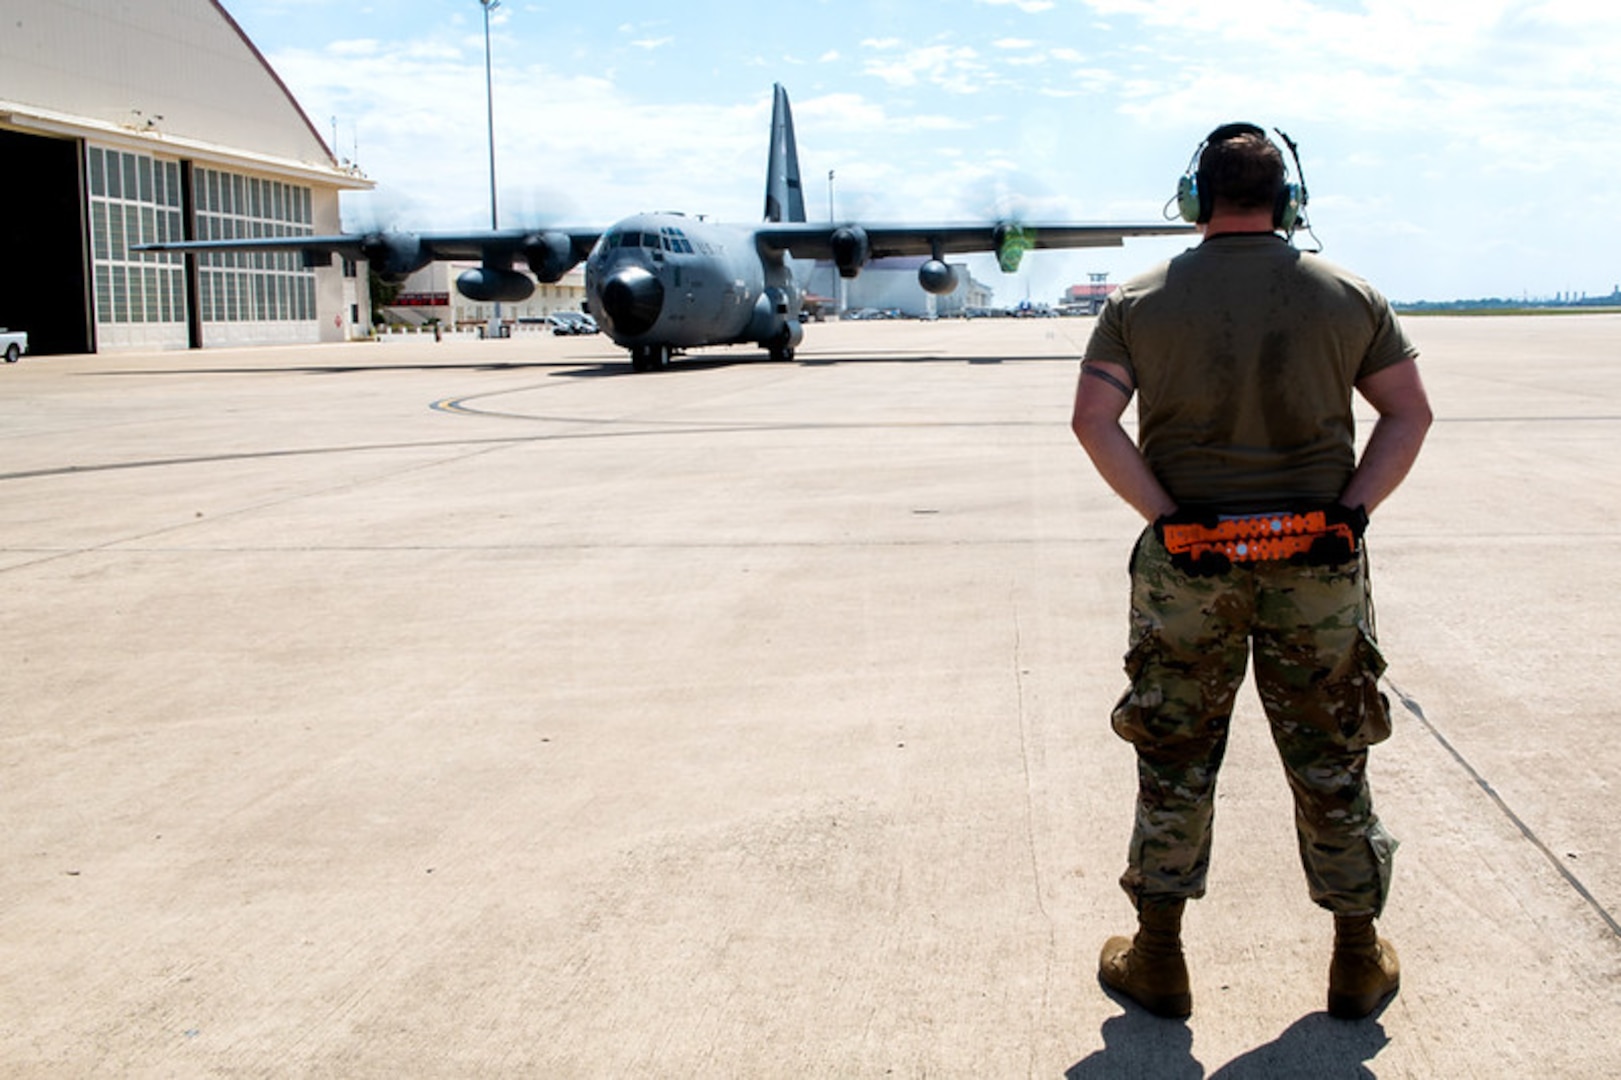 Master Sgt. Kevin Cheatham, 403rd Aircraft Maintenance Squadron, Keesler Air Force Base, Miss., prepares to marshal a C-130 in support of hurricane evacuation operations during hurricane Delta Oct. 8, 2020, at Joint San Antonio-Kelly Field, Texas. Eleven C-130s from the 403rd Wing, Keesler Air Force Base, Miss., were moved to JBSA-Kelly Field.